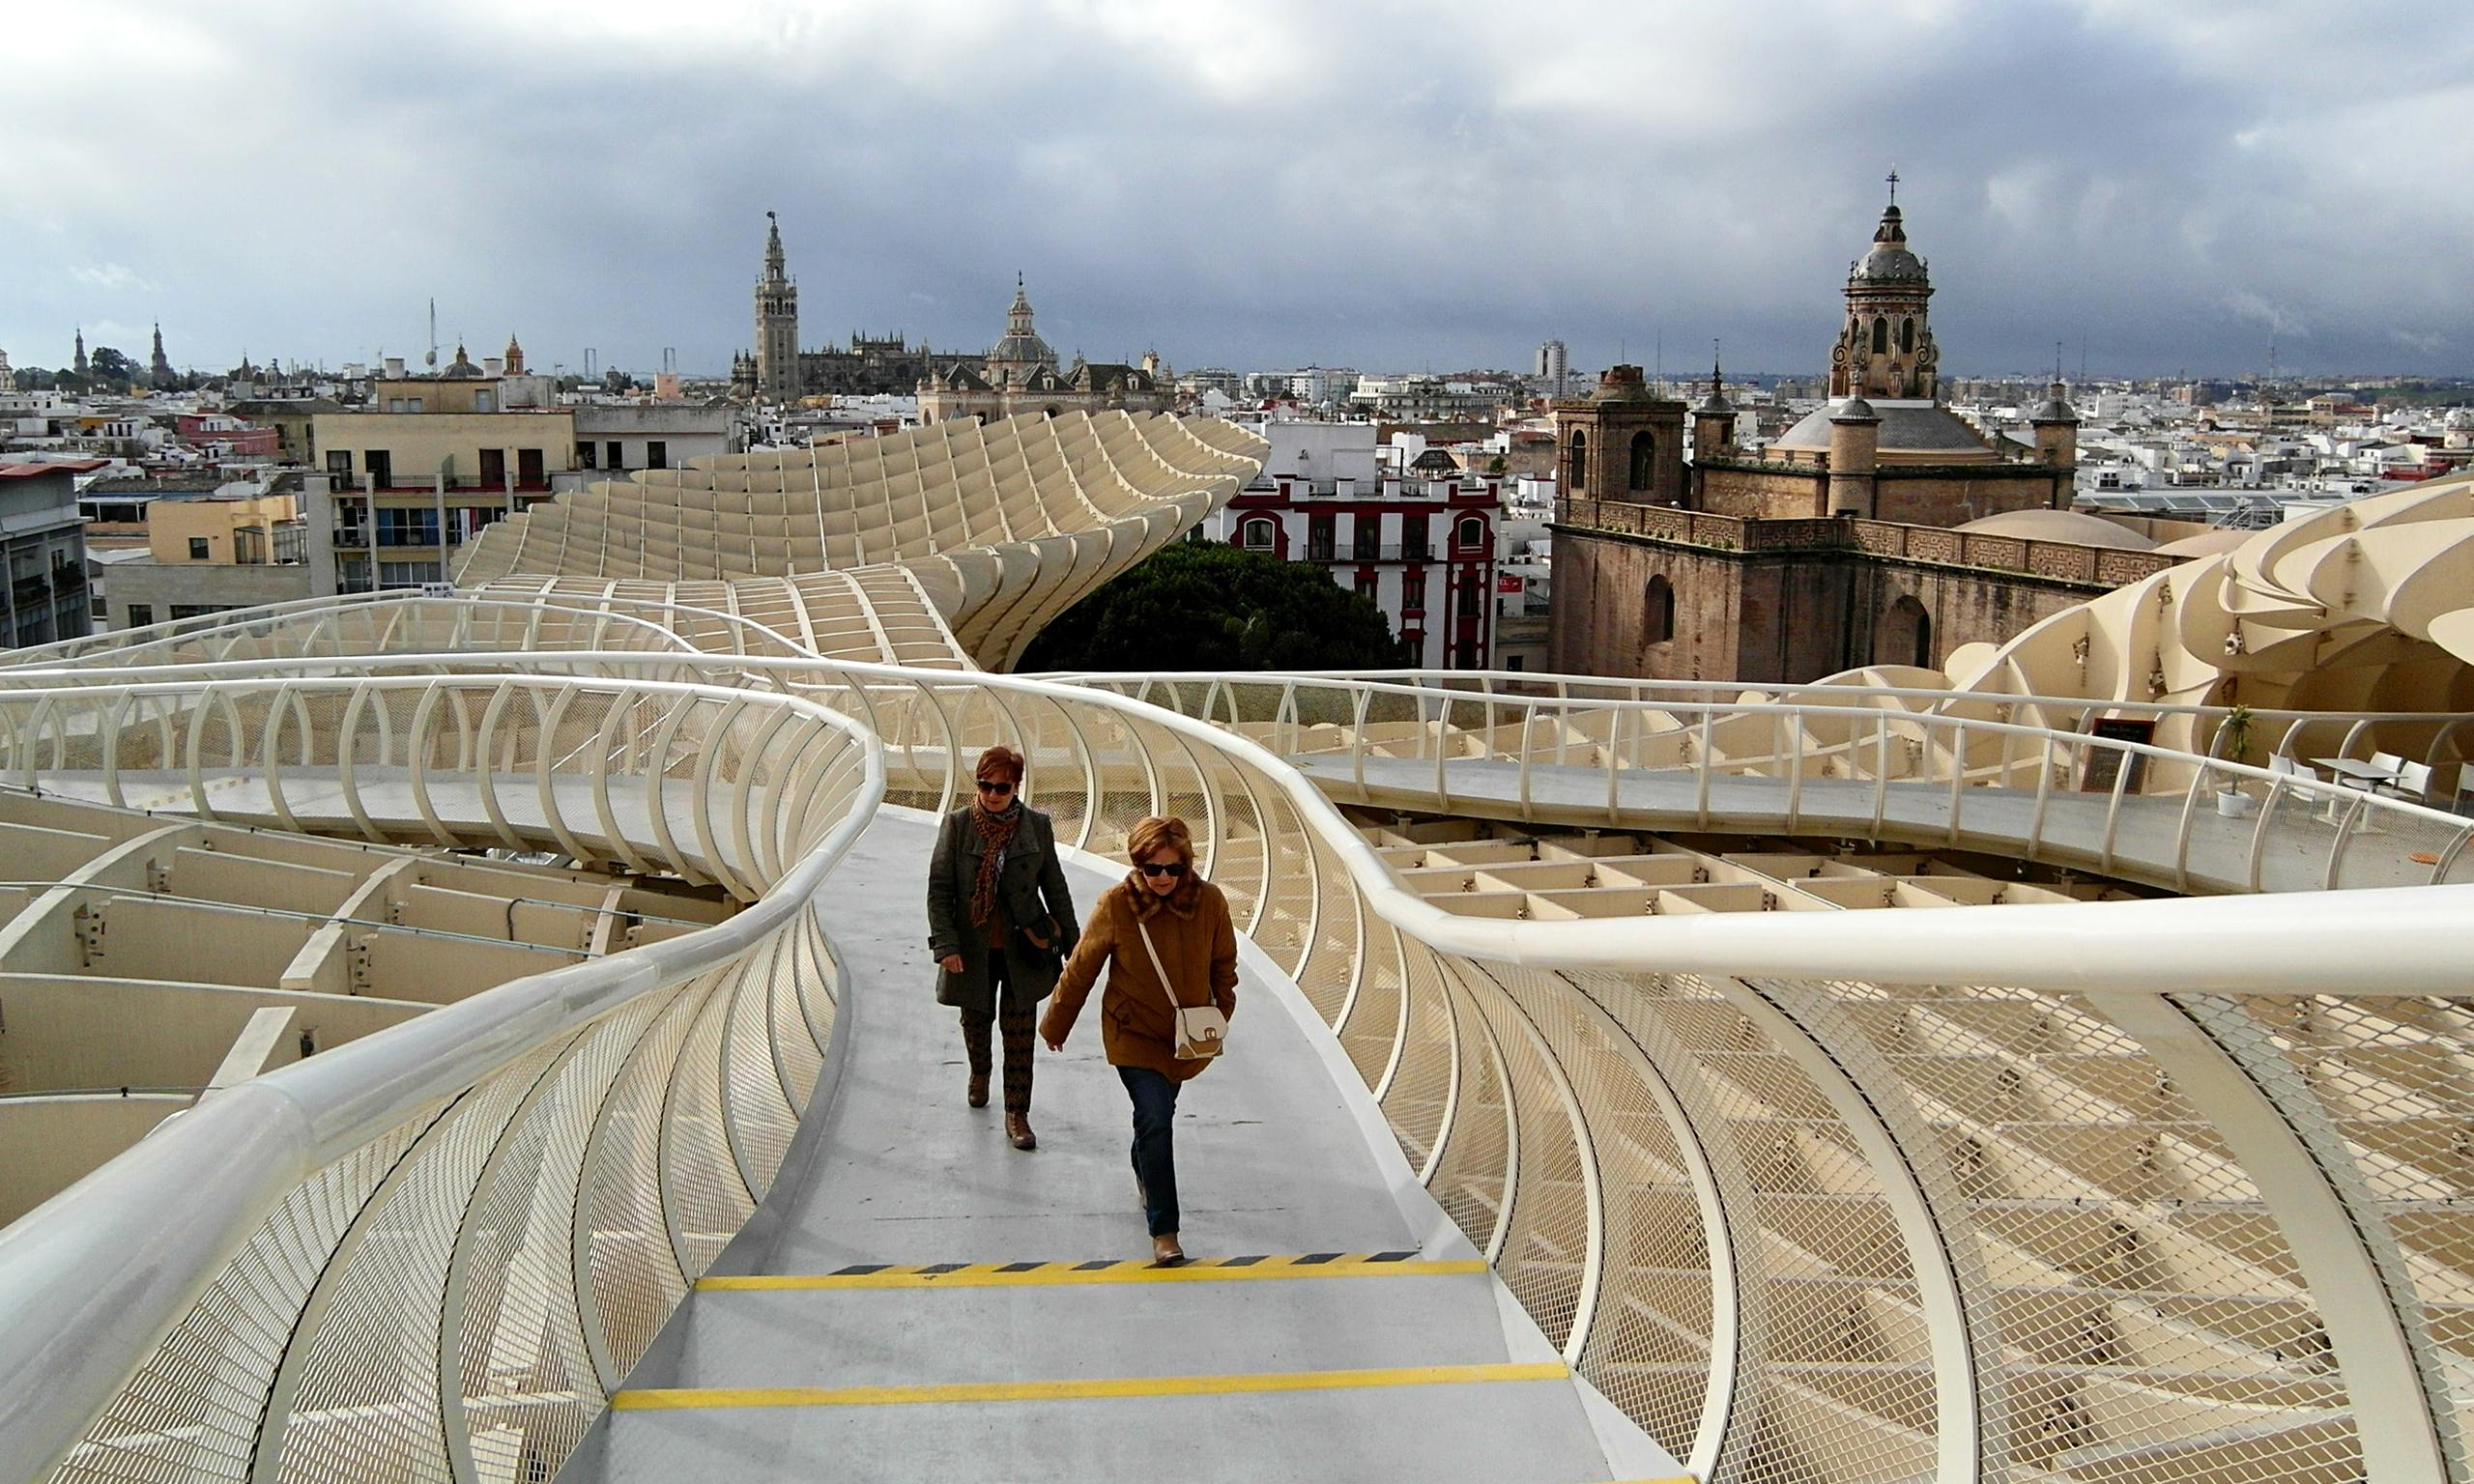 Seville city guide: a day in Alameda and Macarena | Travel | The Guardian